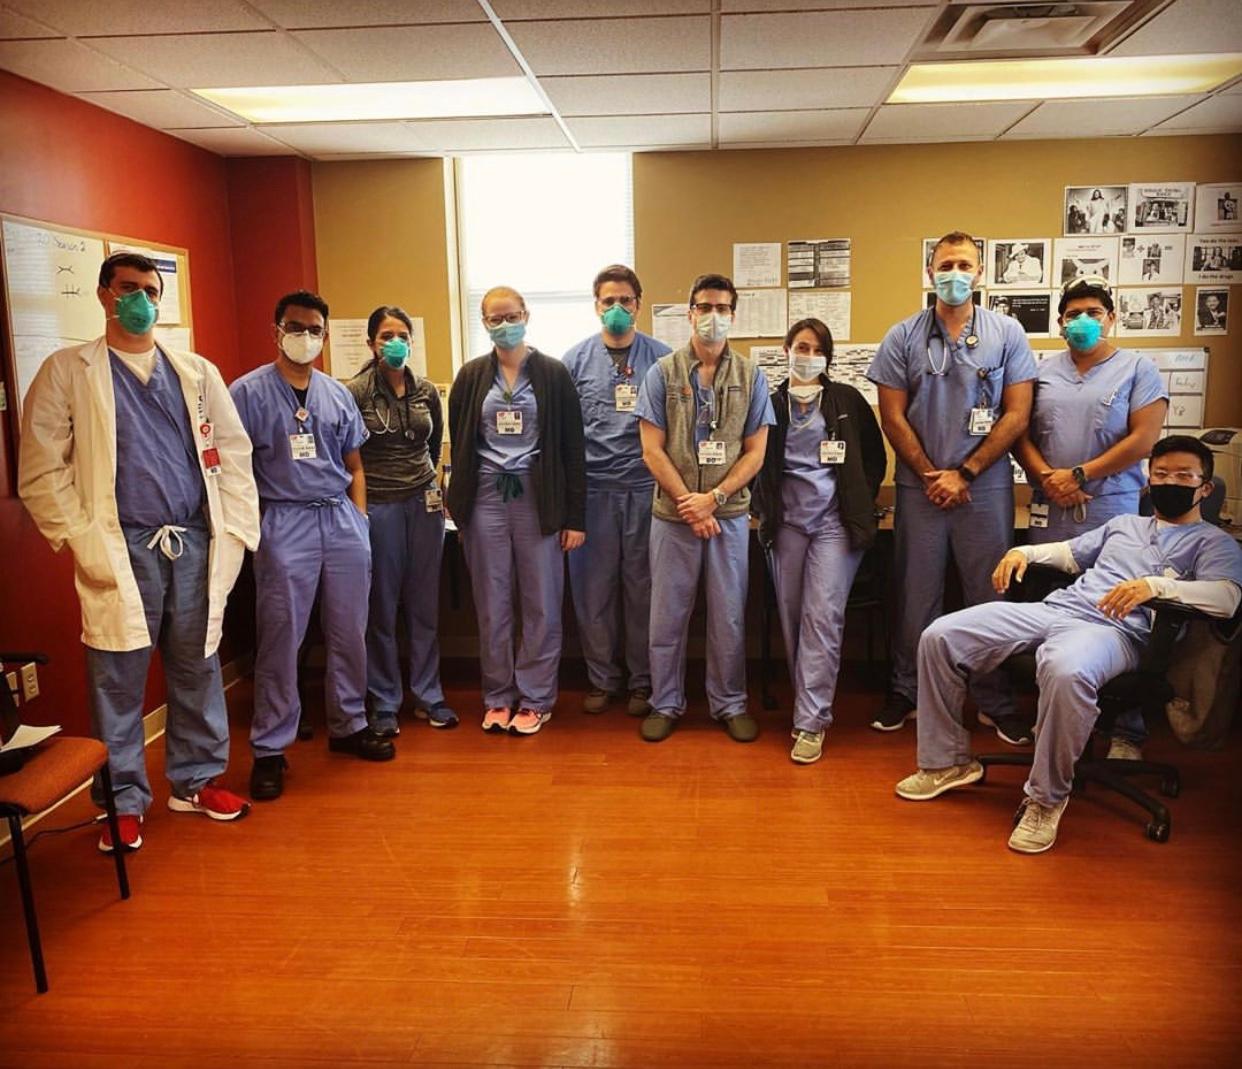 Group photo of residents in scrubs and masks